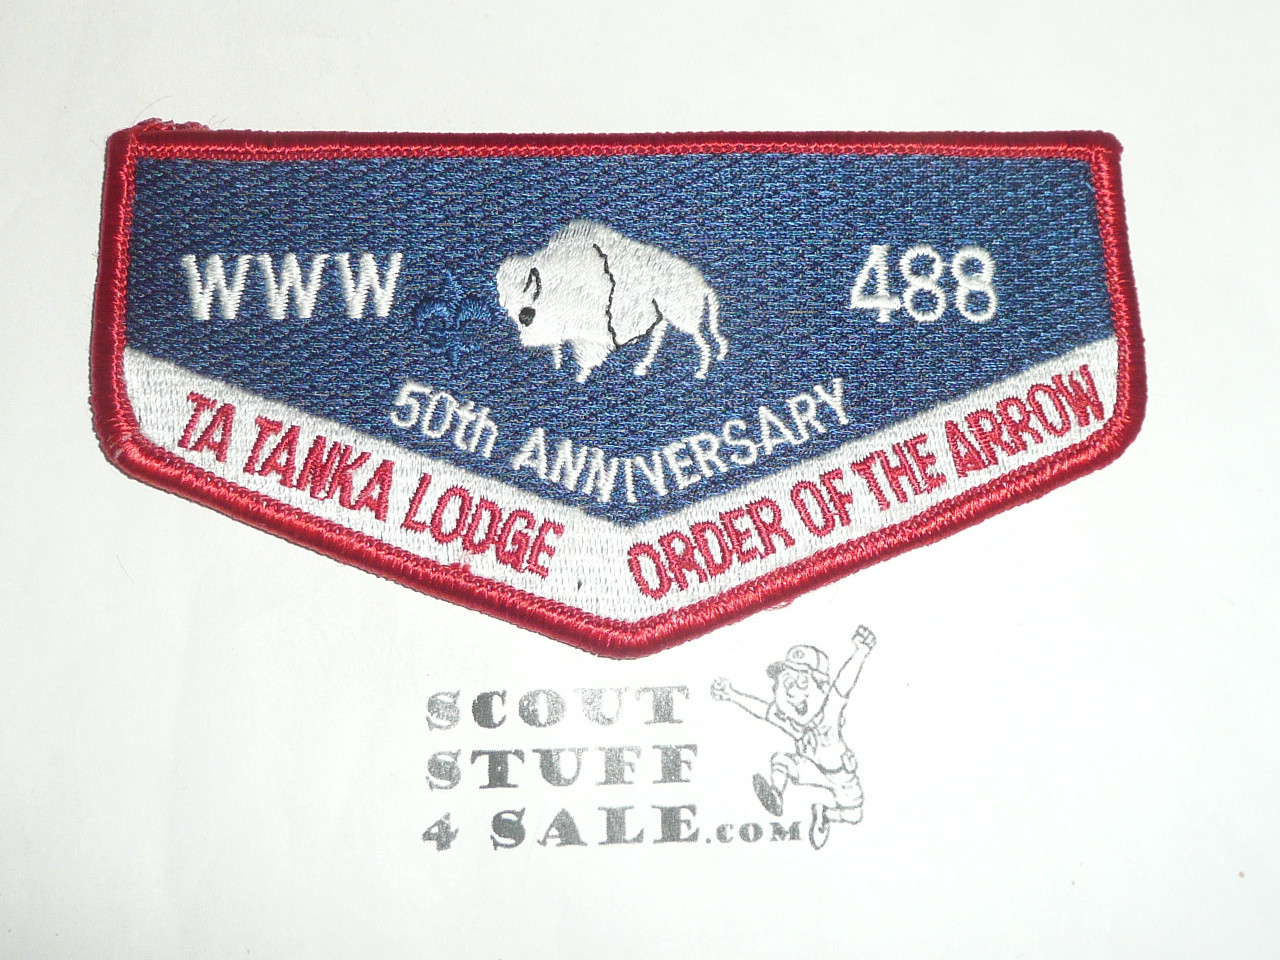 Order of the Arrow Lodge #488 Ta Tanka s53 2-sided 50th Anniversary Flap Patch